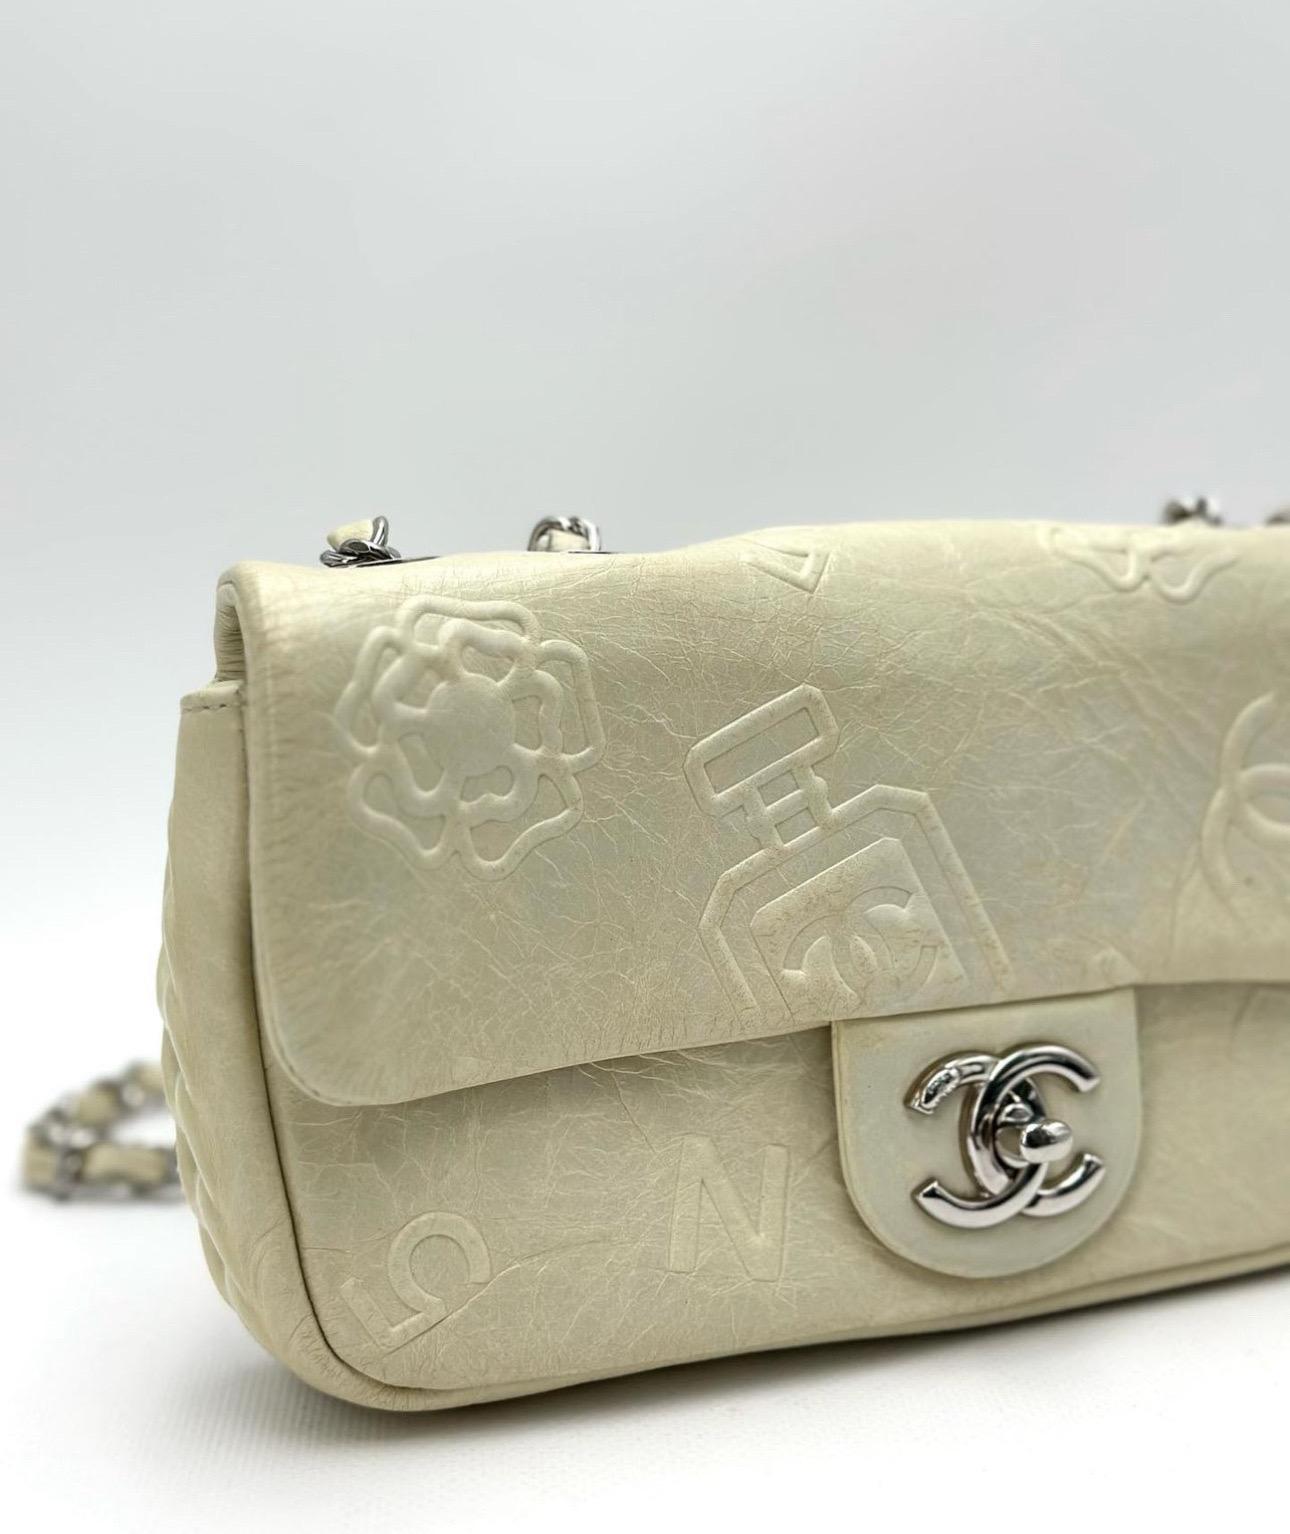 Chanel White Embossed Leather Precious Symbols Small Flap Bag For Sale 12